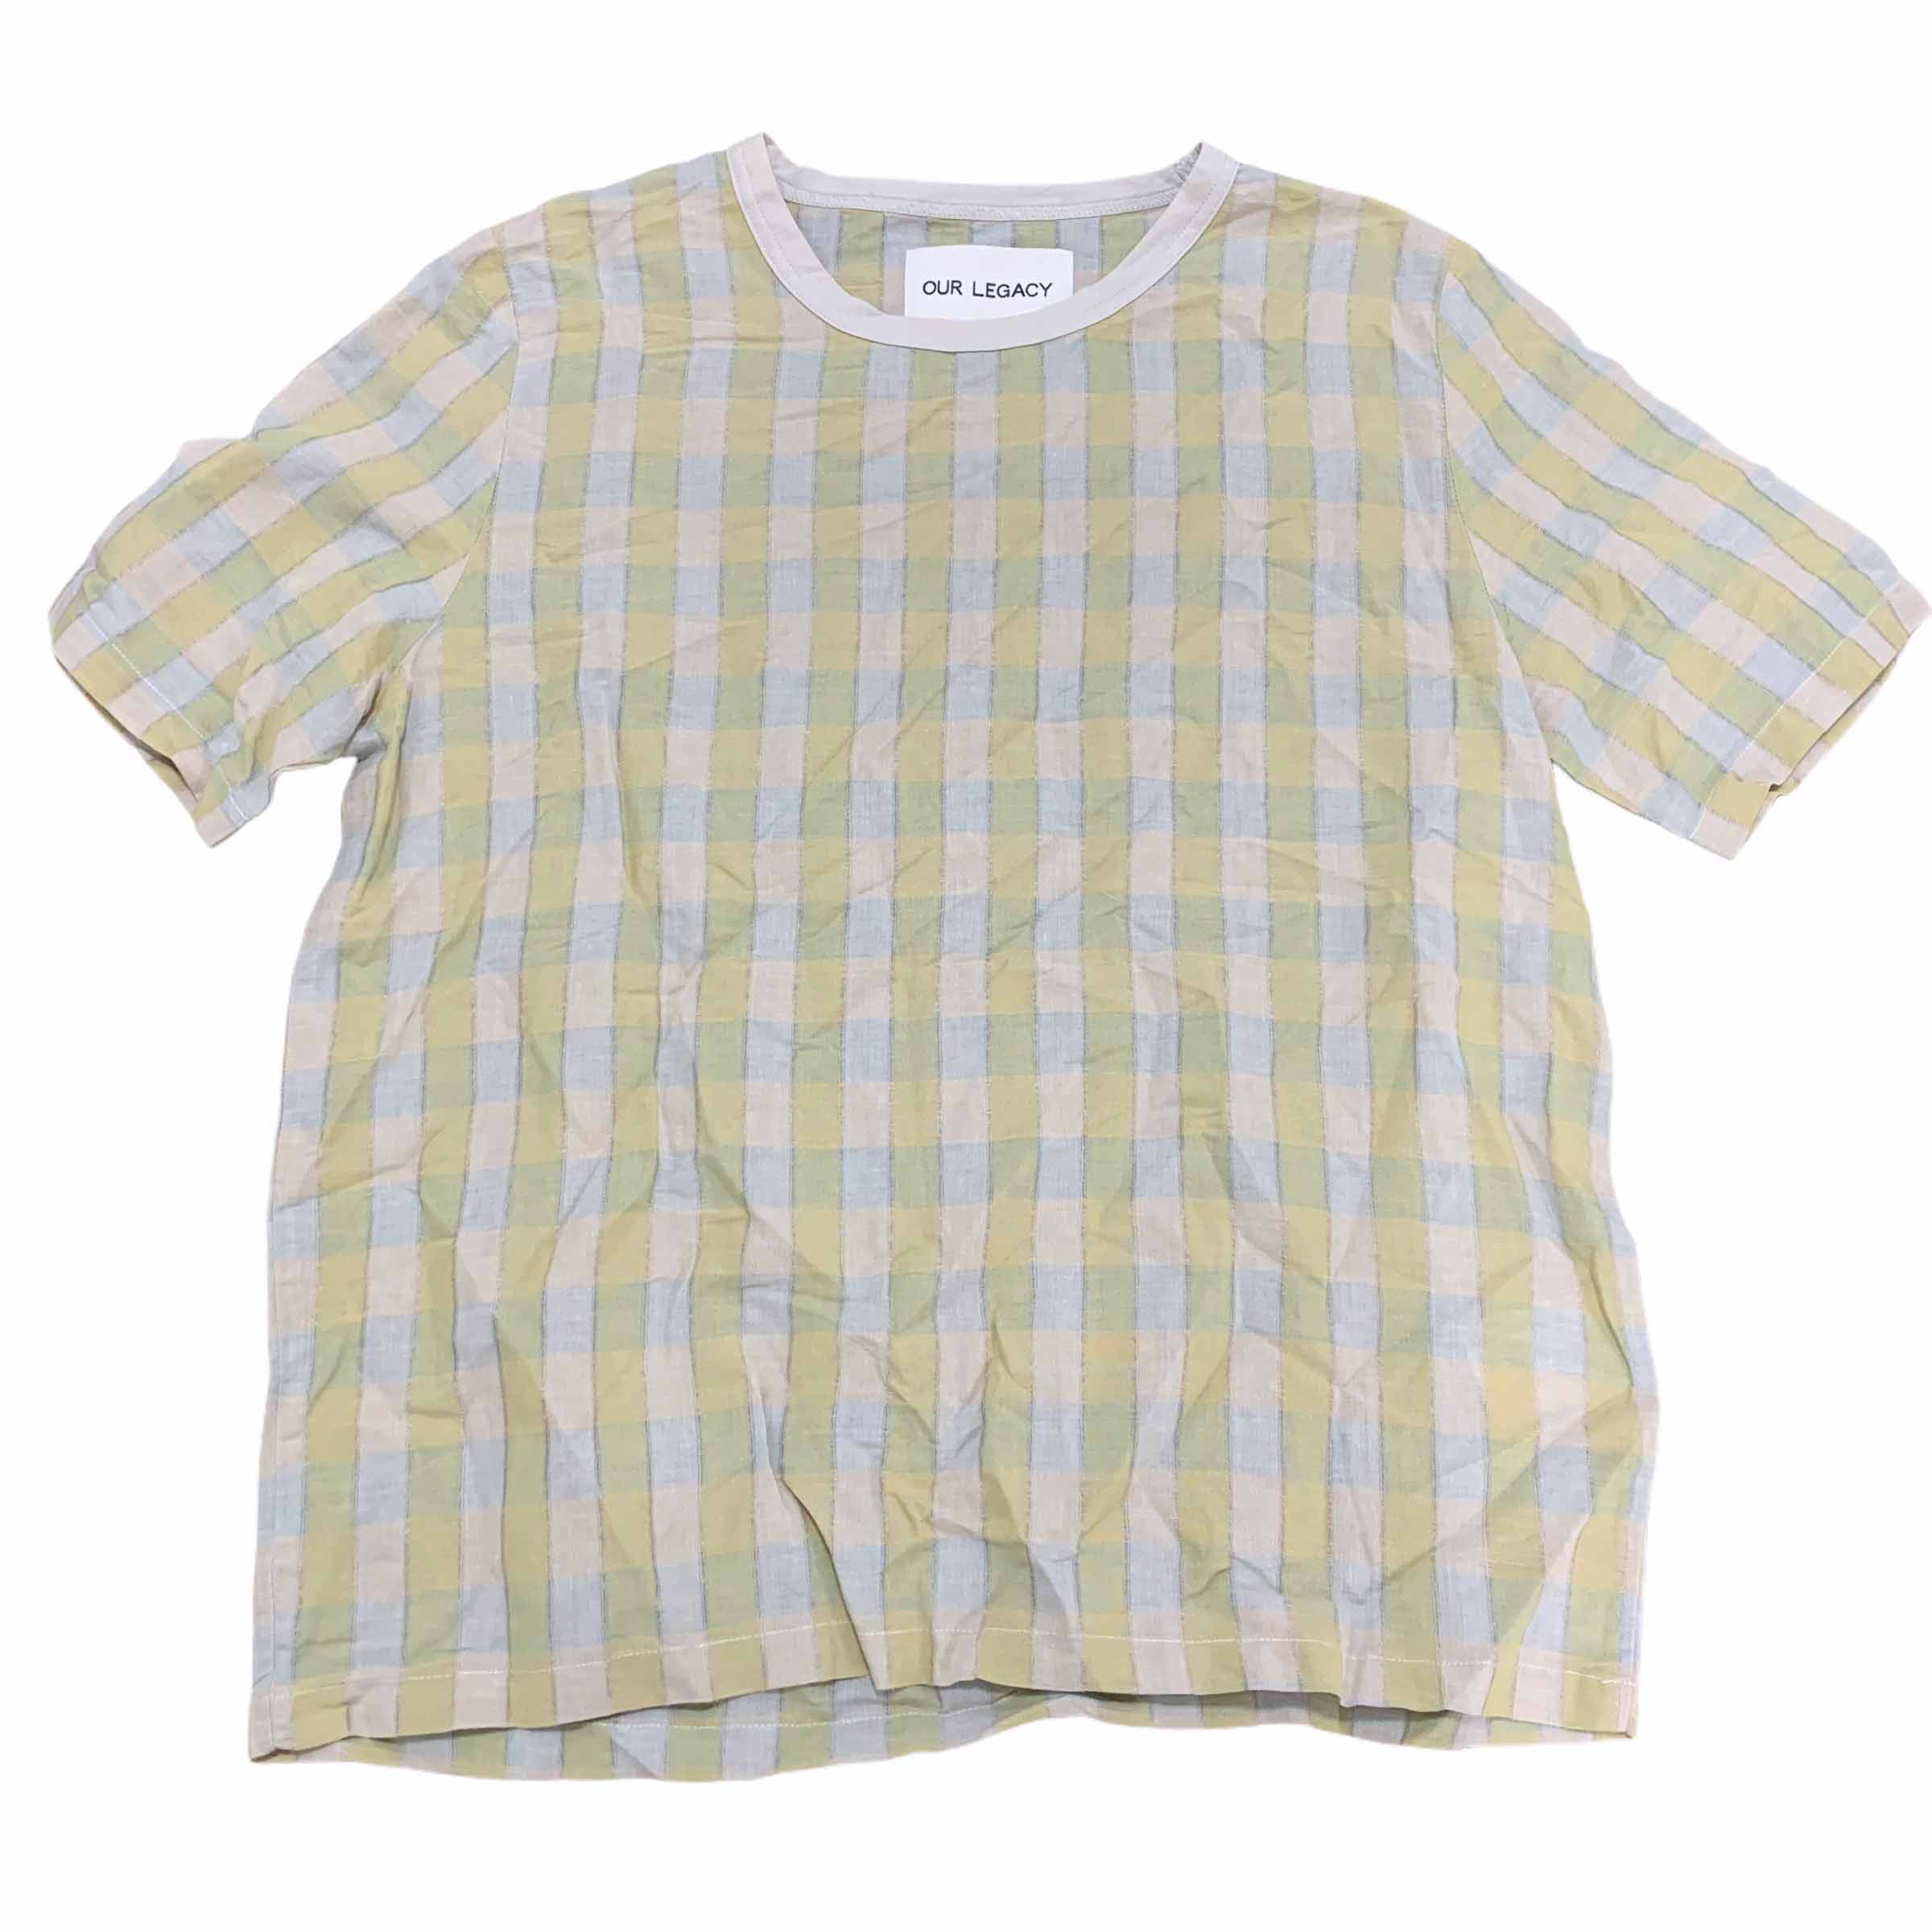 [Our Legacy] Yellow Sprite Short Sleeve Tee - Size 46